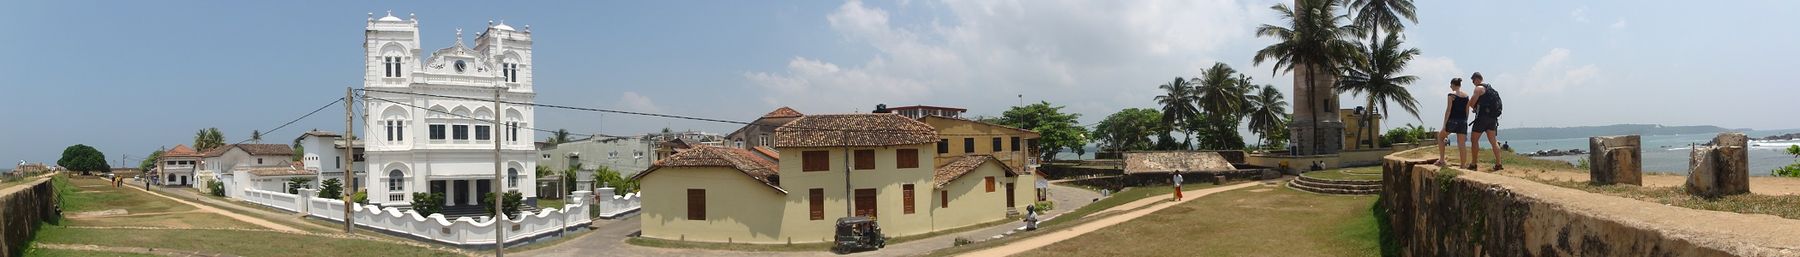 Galle_fort